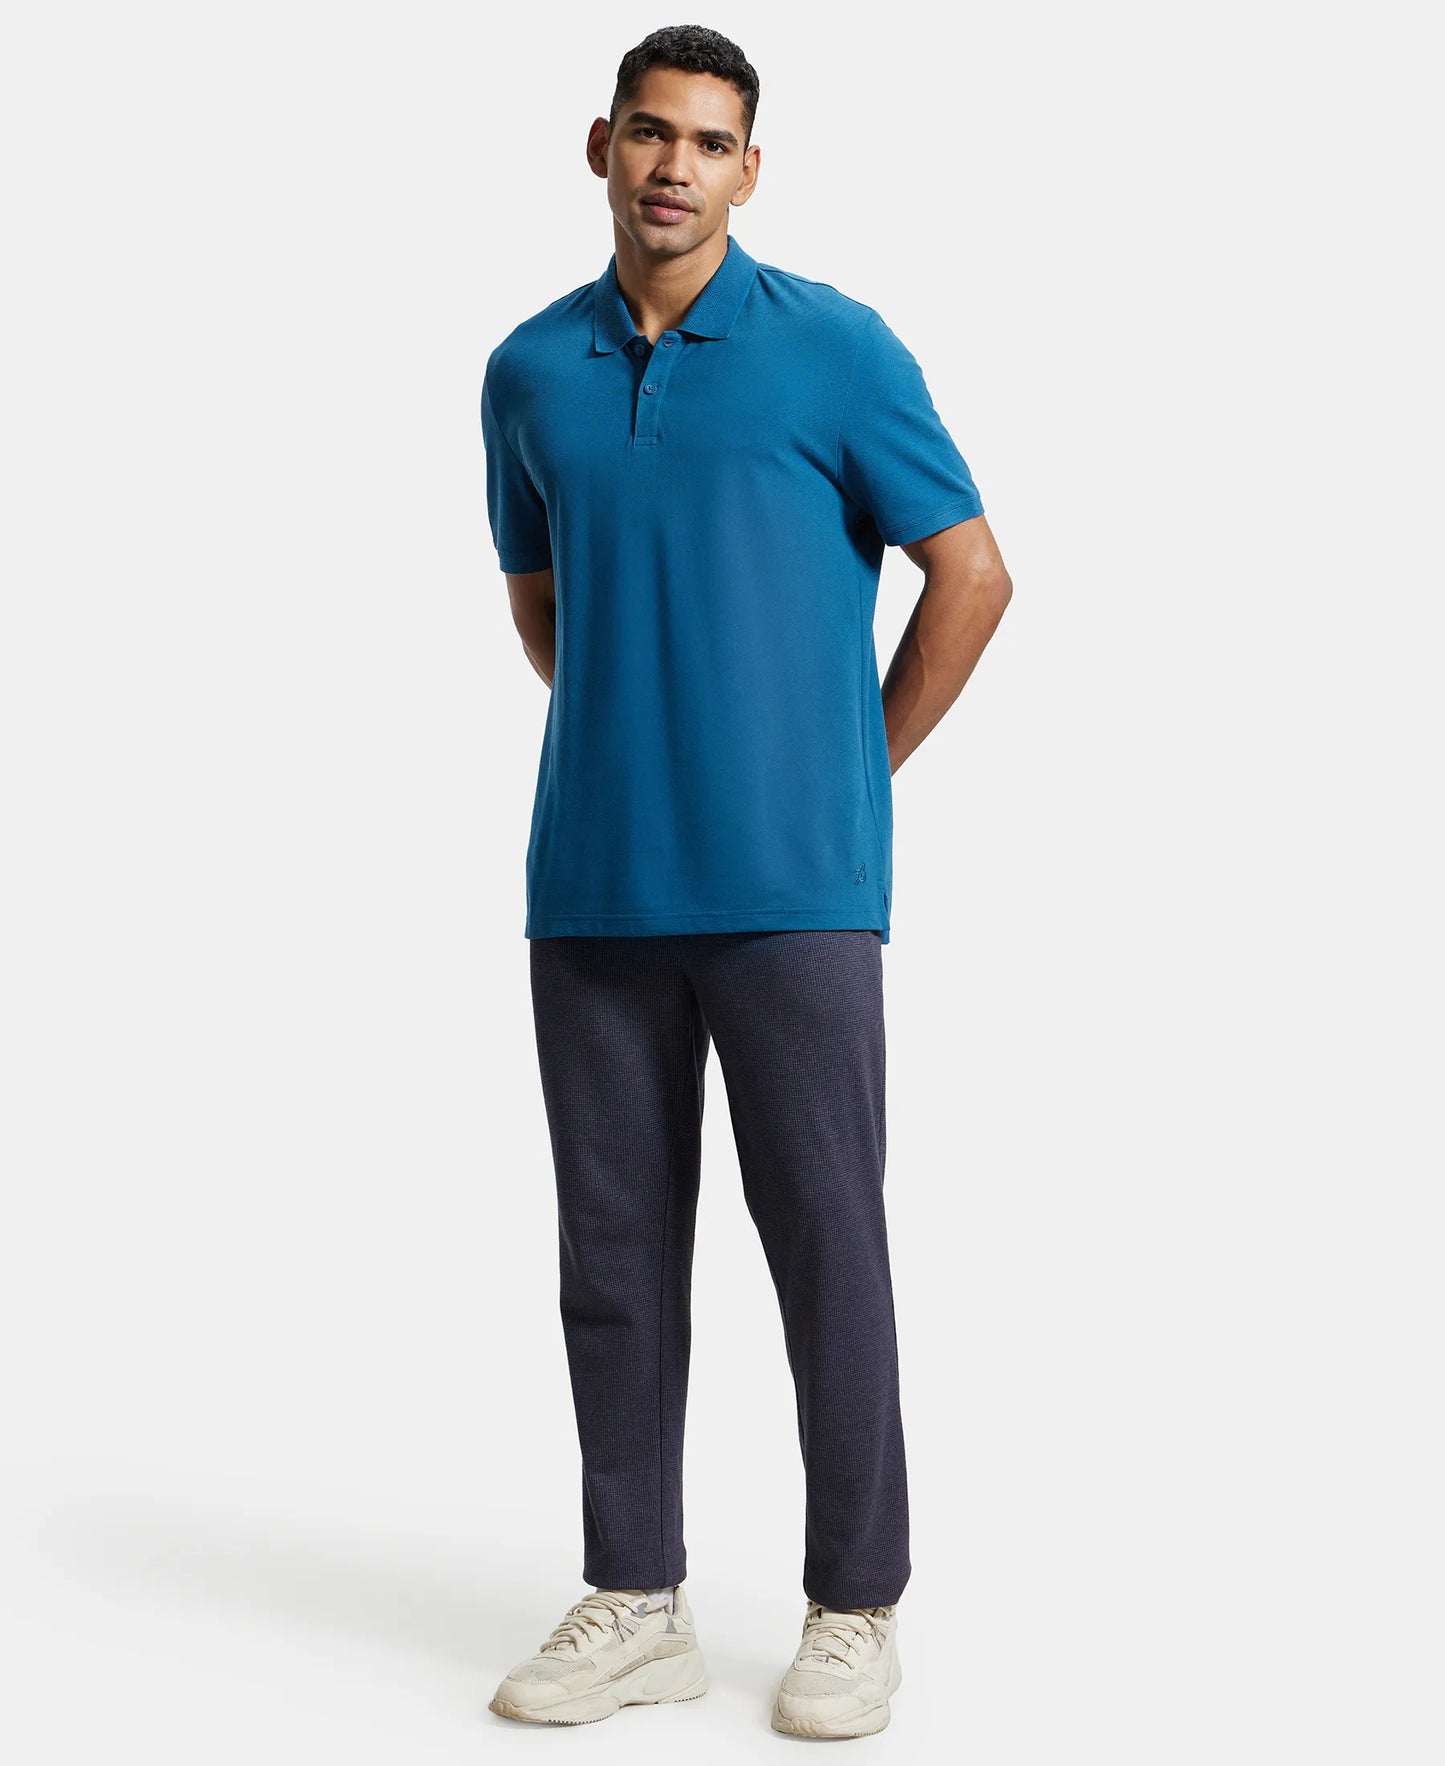 Super Combed Cotton Rich Pique Fabric Solid Half Sleeve Polo T-Shirt - Seaport Teal-4